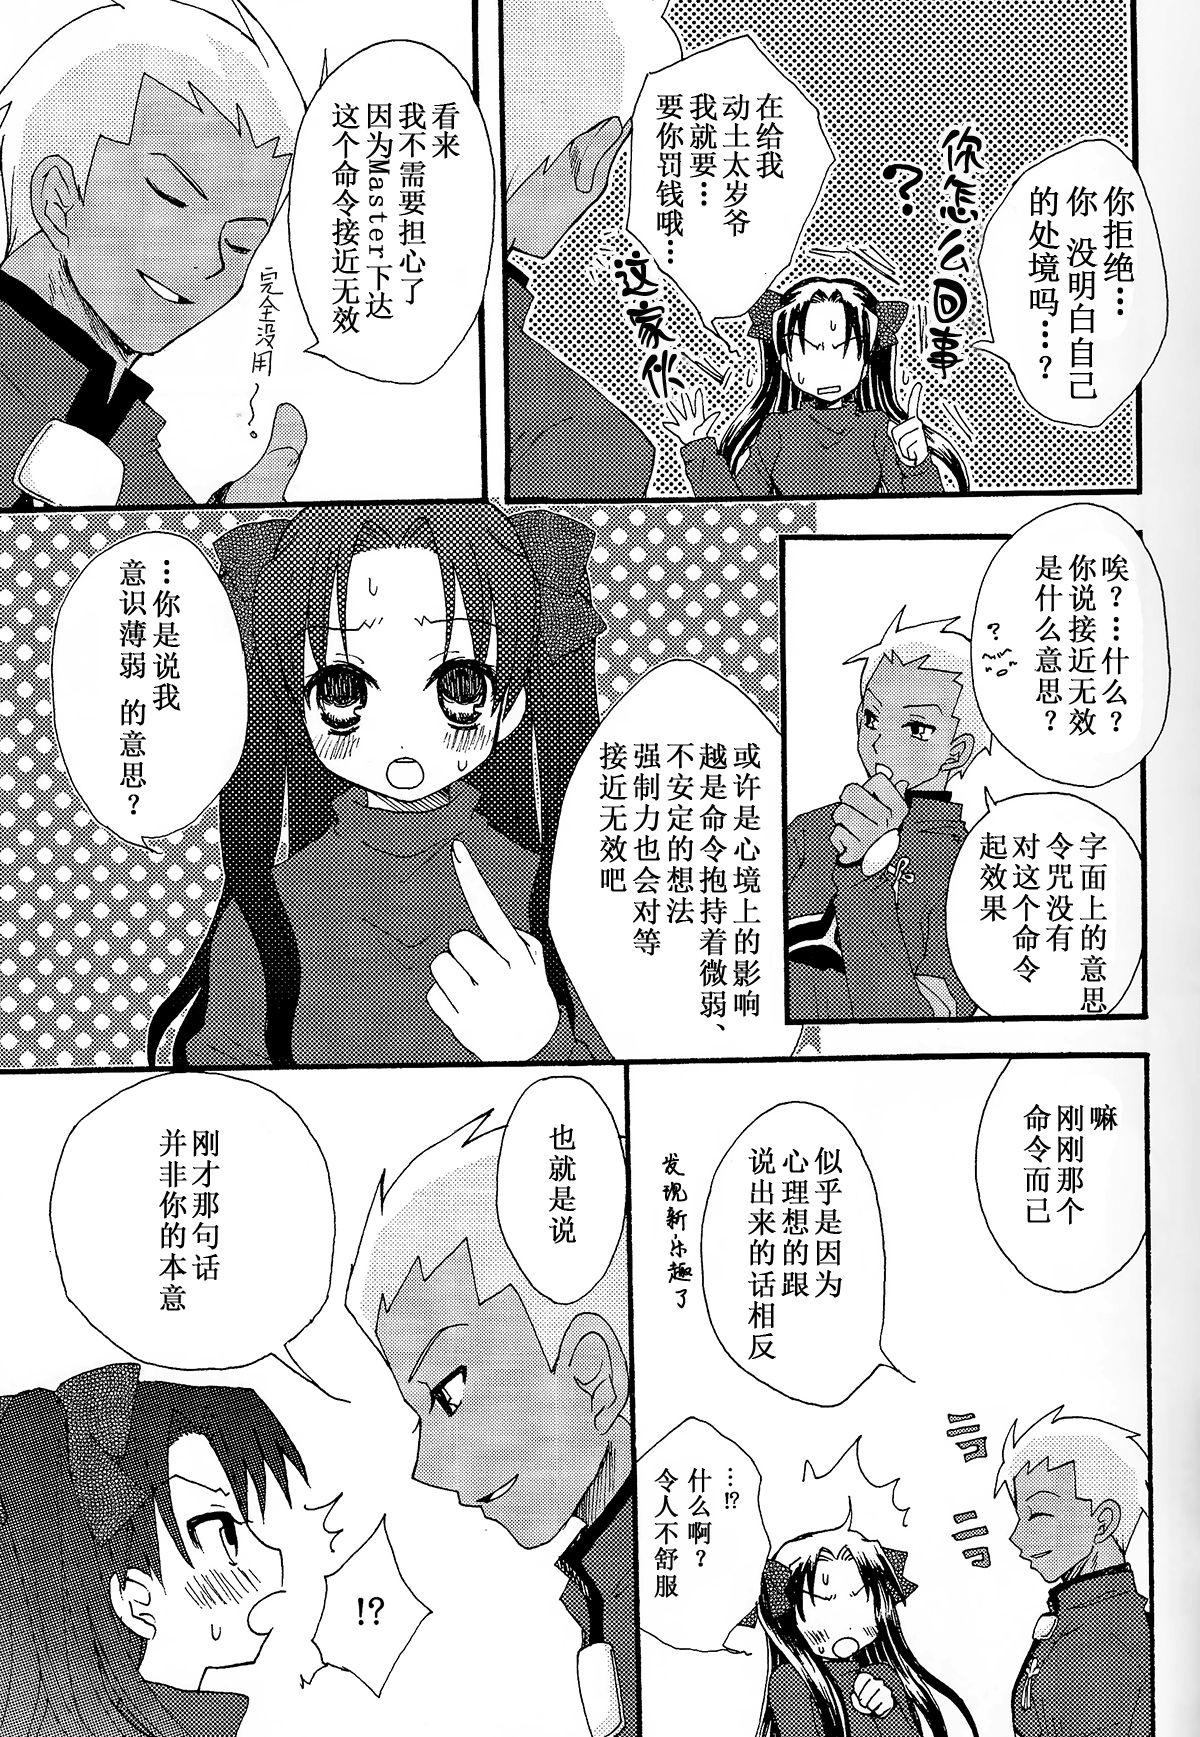 Petite Teen Kanojo to Aiken - Fate stay night Female - Page 6